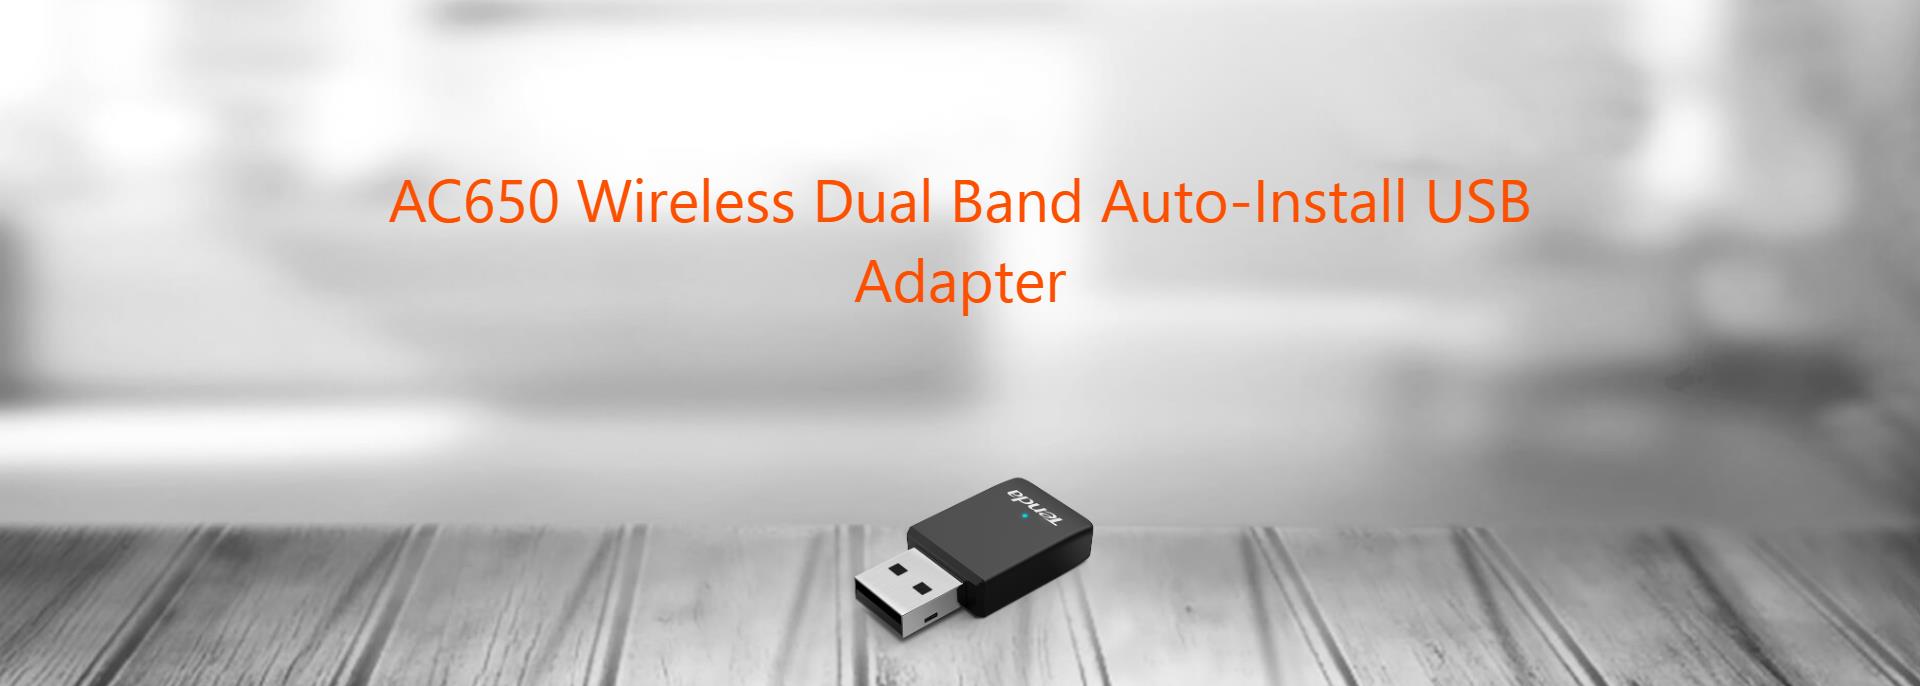 A large marketing image providing additional information about the product Tenda U9 AC650 Dual-Band USB WiFi Adapter - Additional alt info not provided